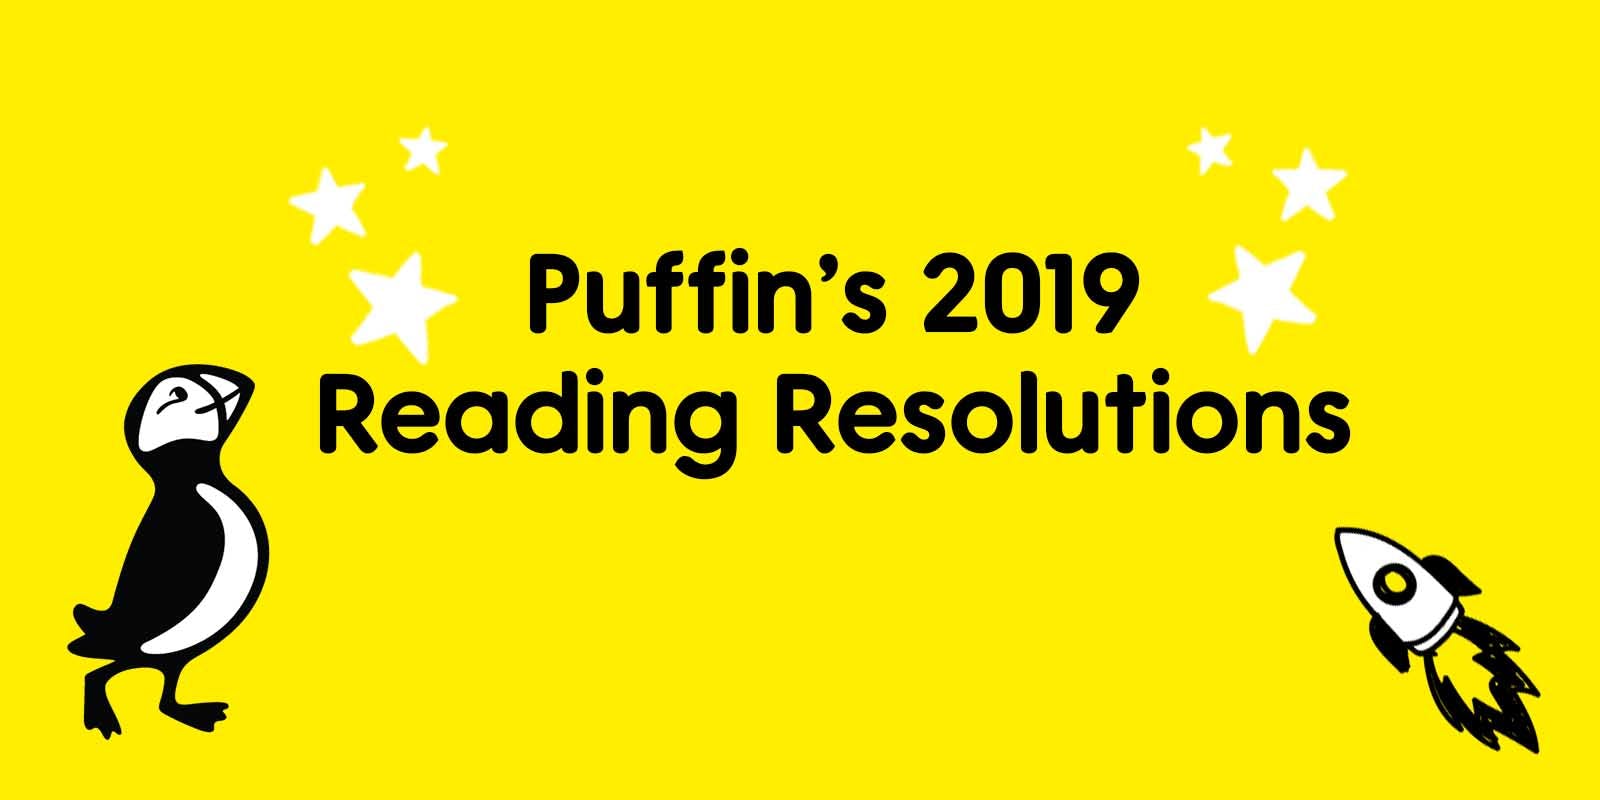 Puffin's 2019 reading resolutions